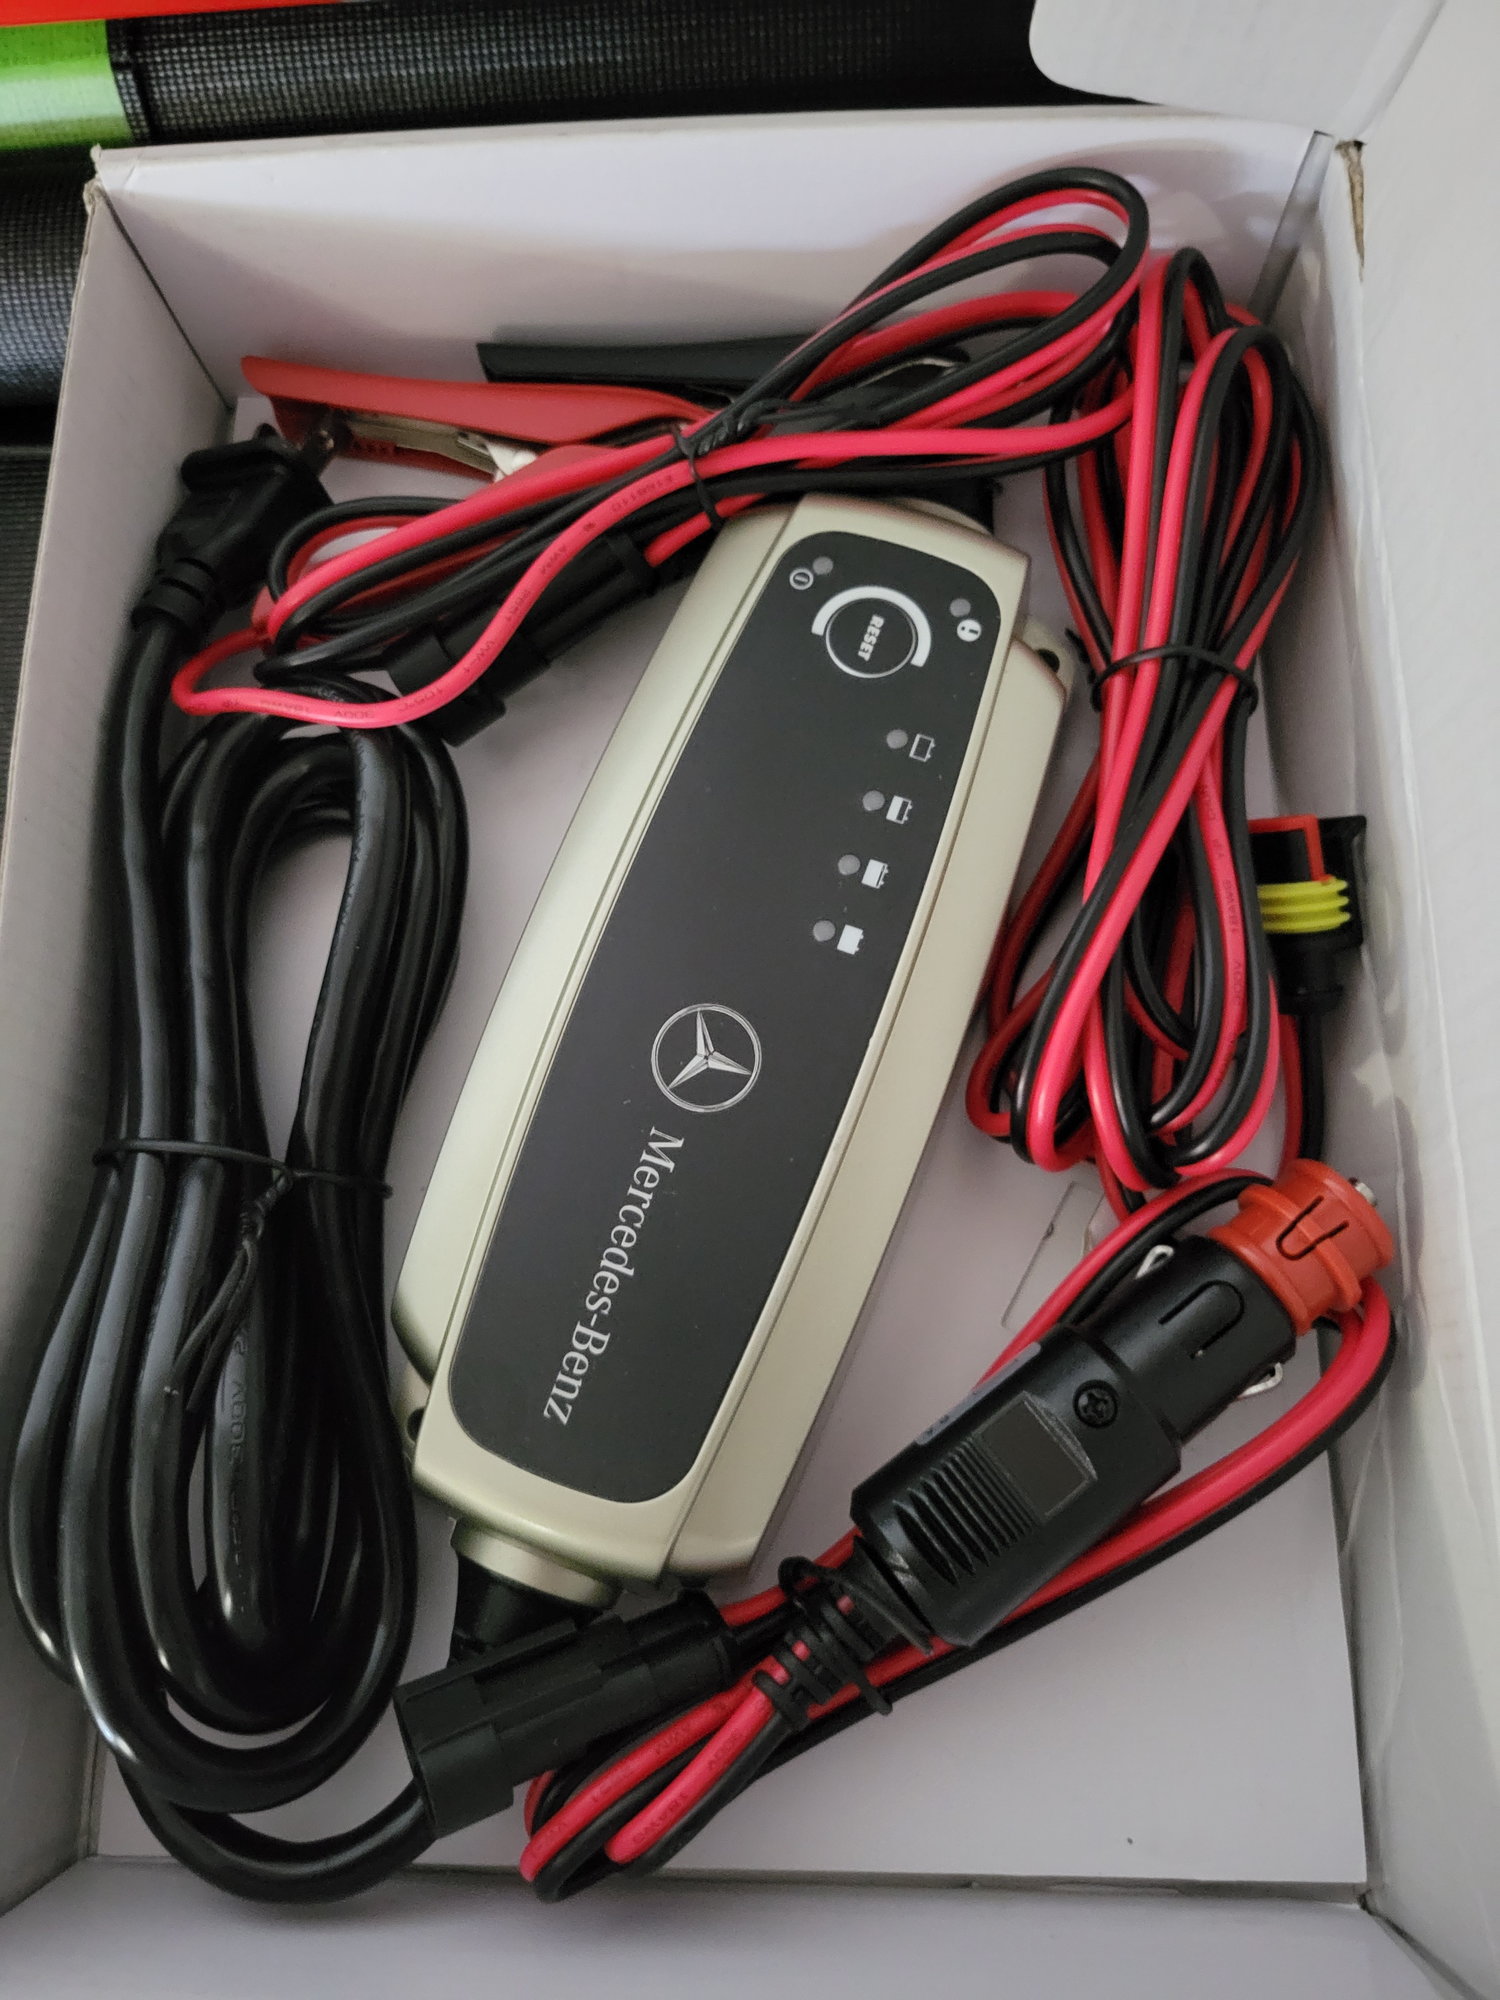 Accessories - NEW Genuine OEM Mercedes-Benz Battery Trickle Charger A 000 982 29 21 ALL MODELS - New - All Years Mercedes-Benz All Models - Waterbury, CT 06705, United States